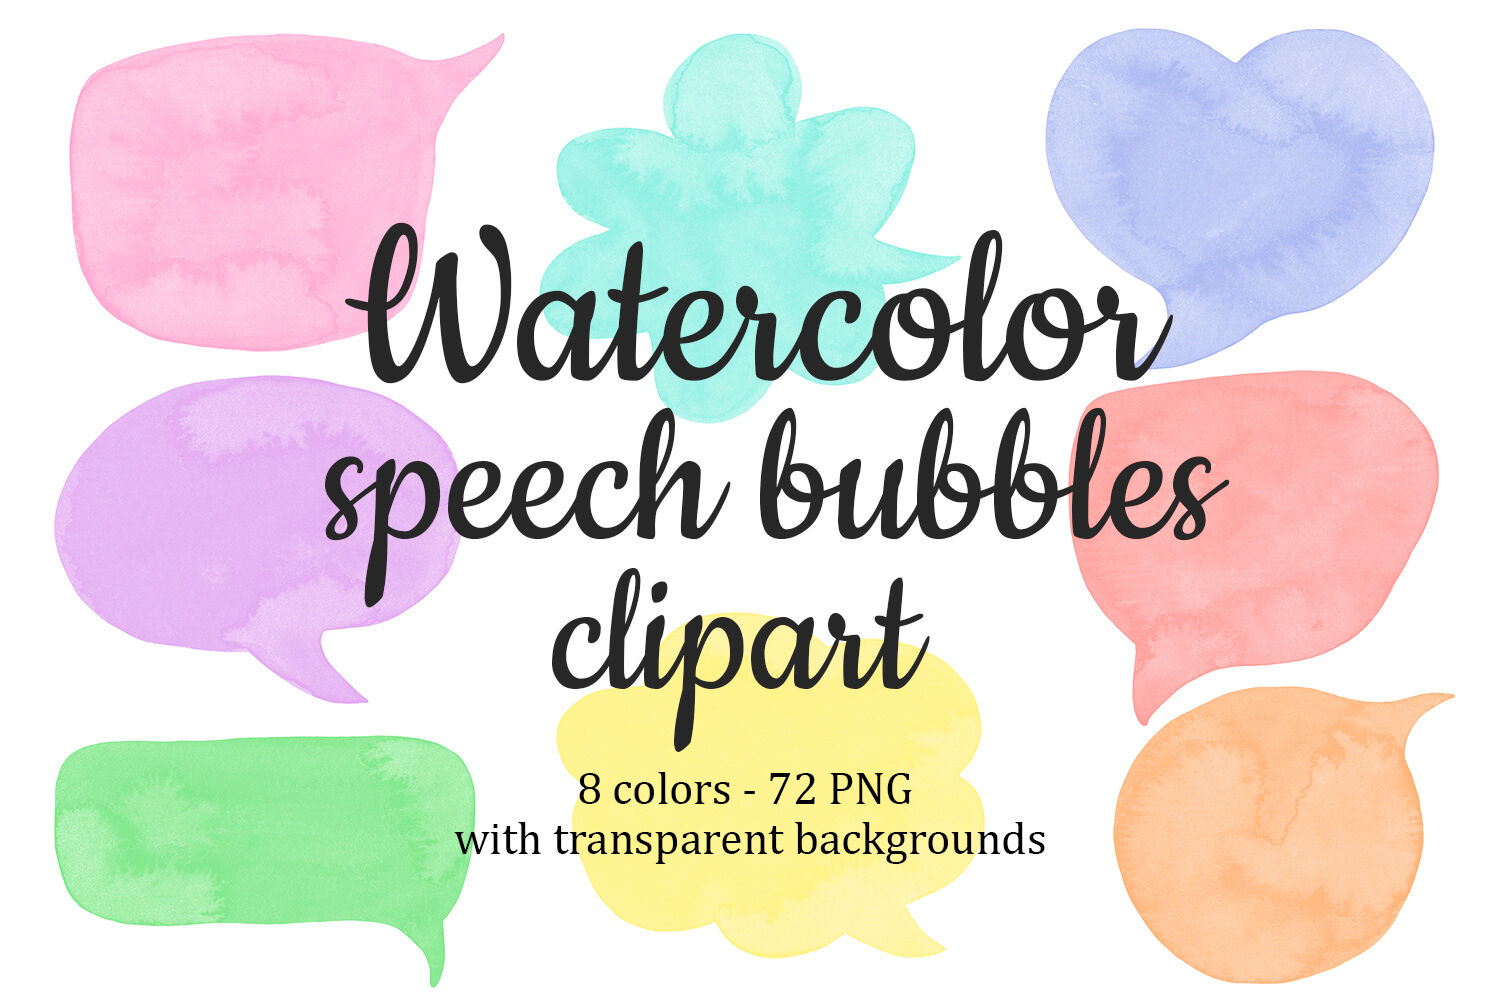 Speech Bubbles Chat Bubble Text Clouds Clipart Colorful Thought Bubble By Sweetreniegraphics Thehungryjpeg Com